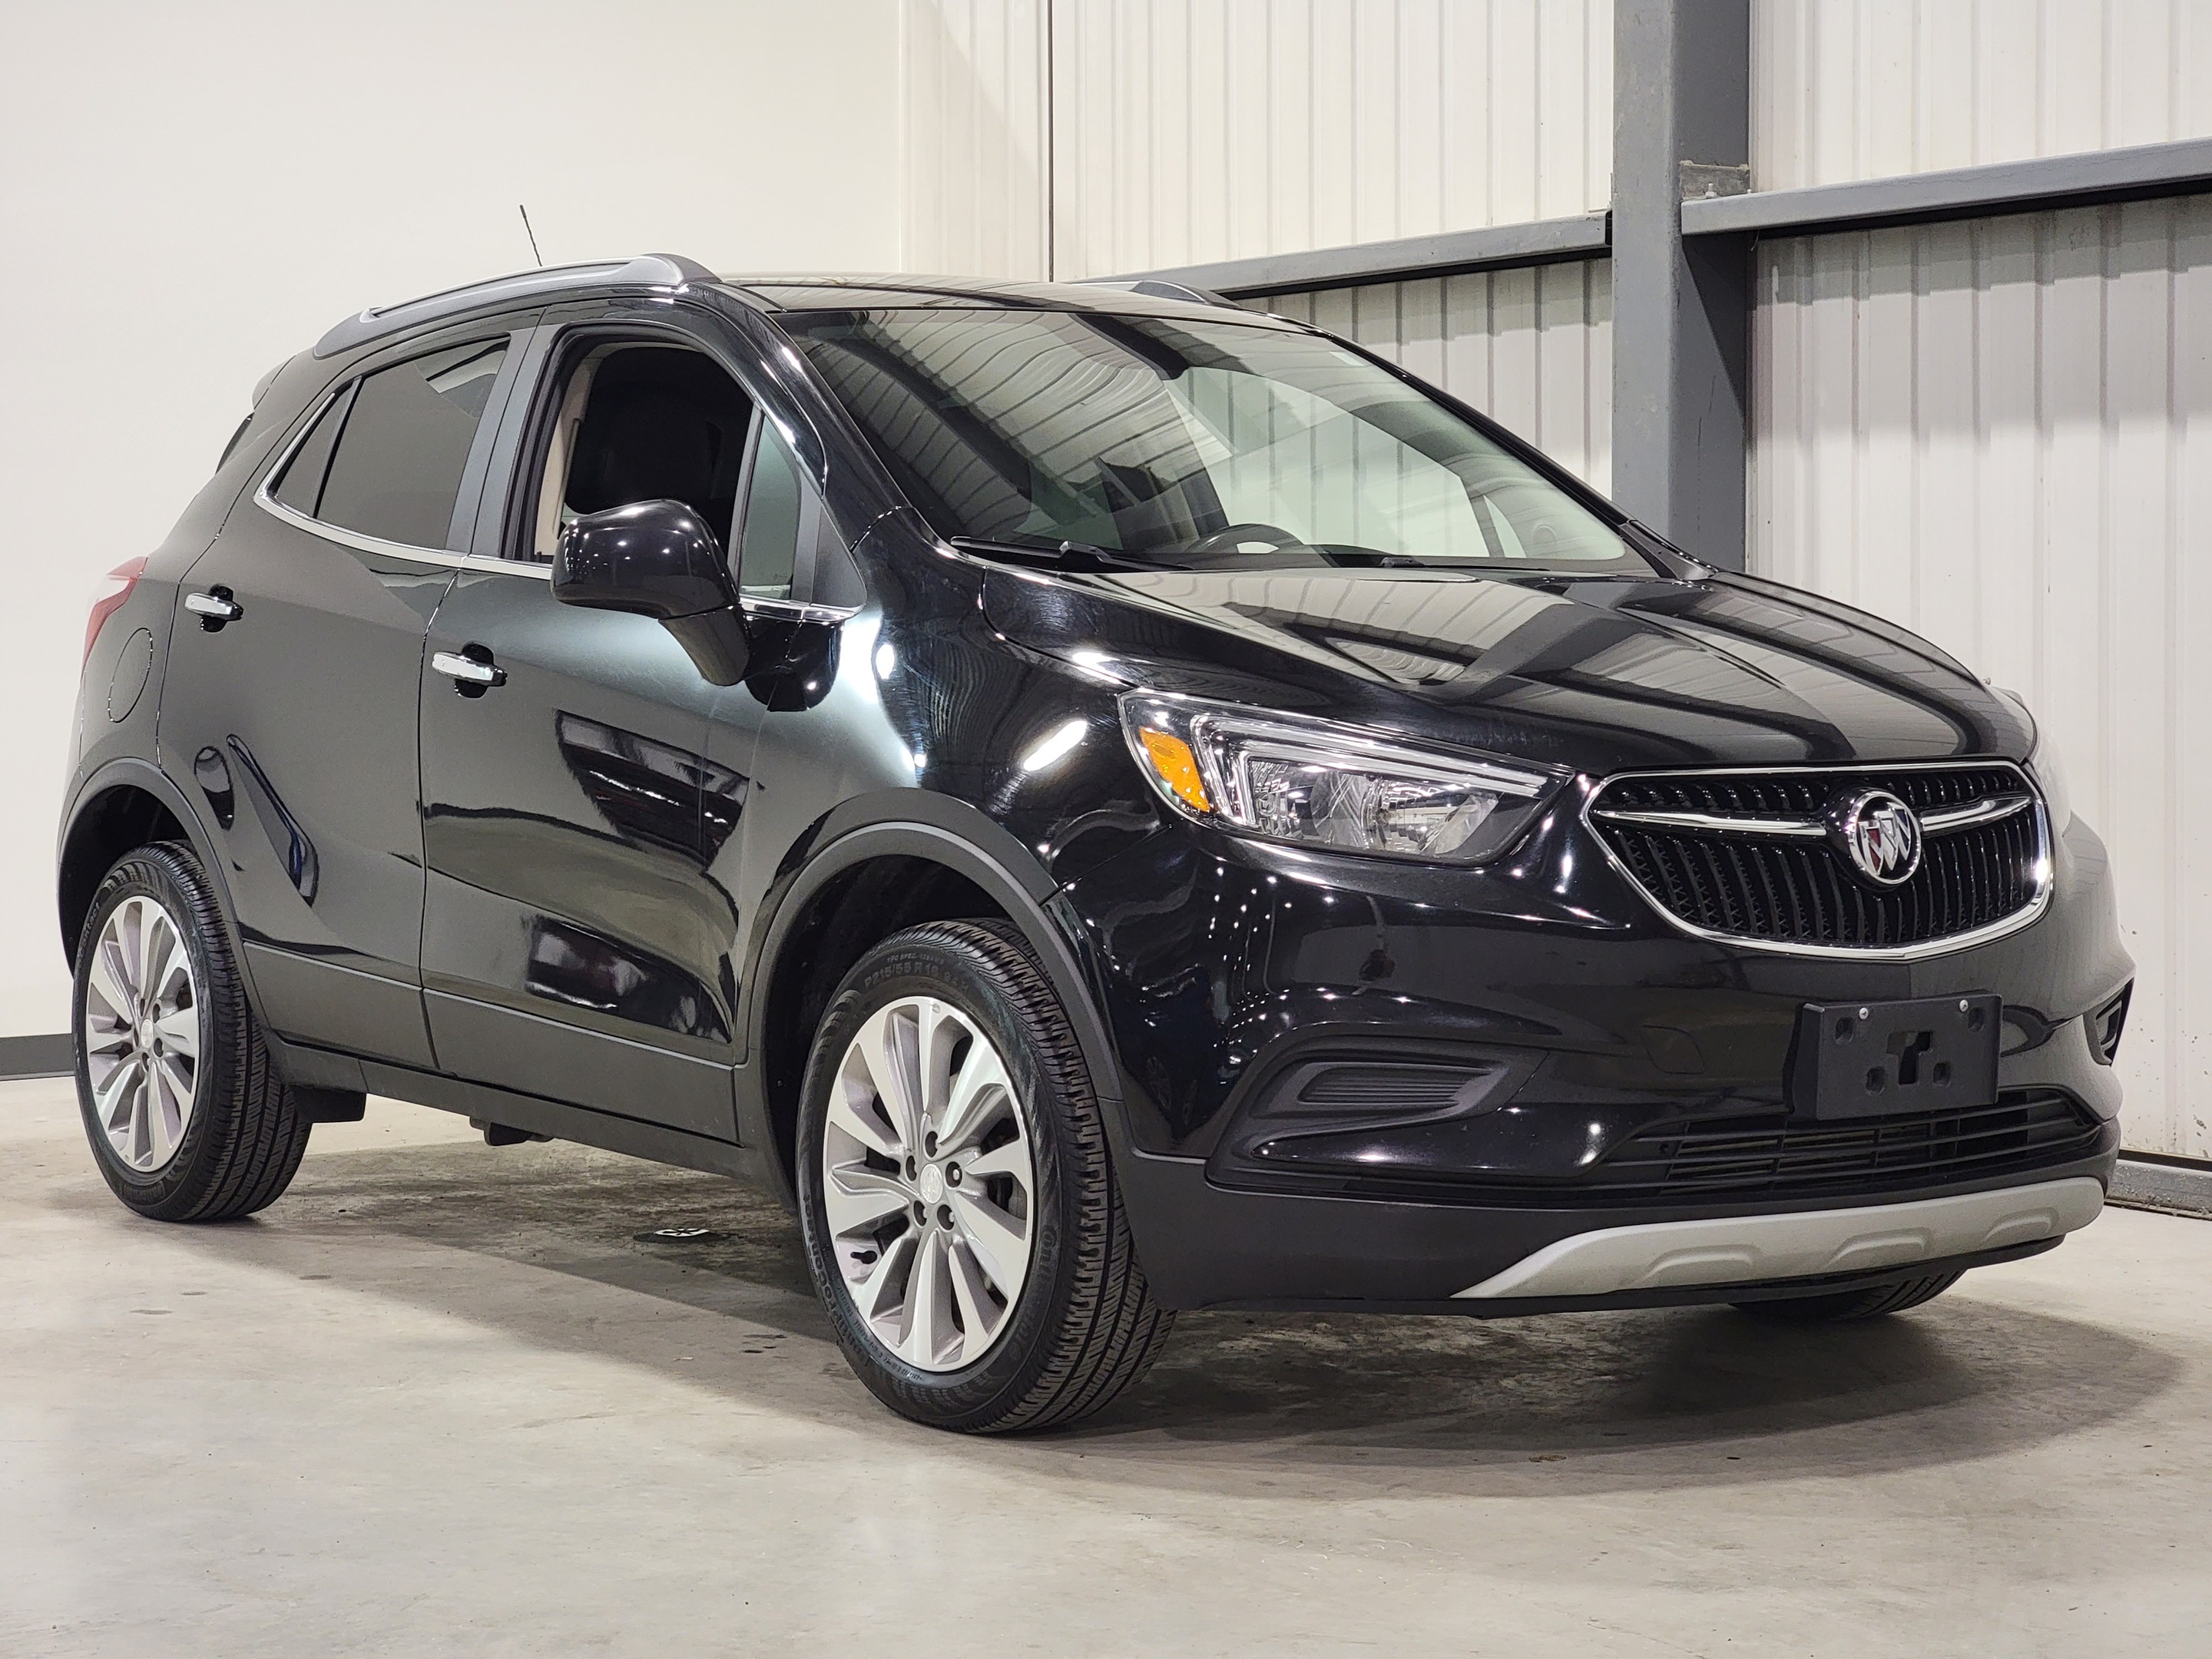 2020 Buick Encore AWD Preferred - Cuir, Camera, Bluthoot